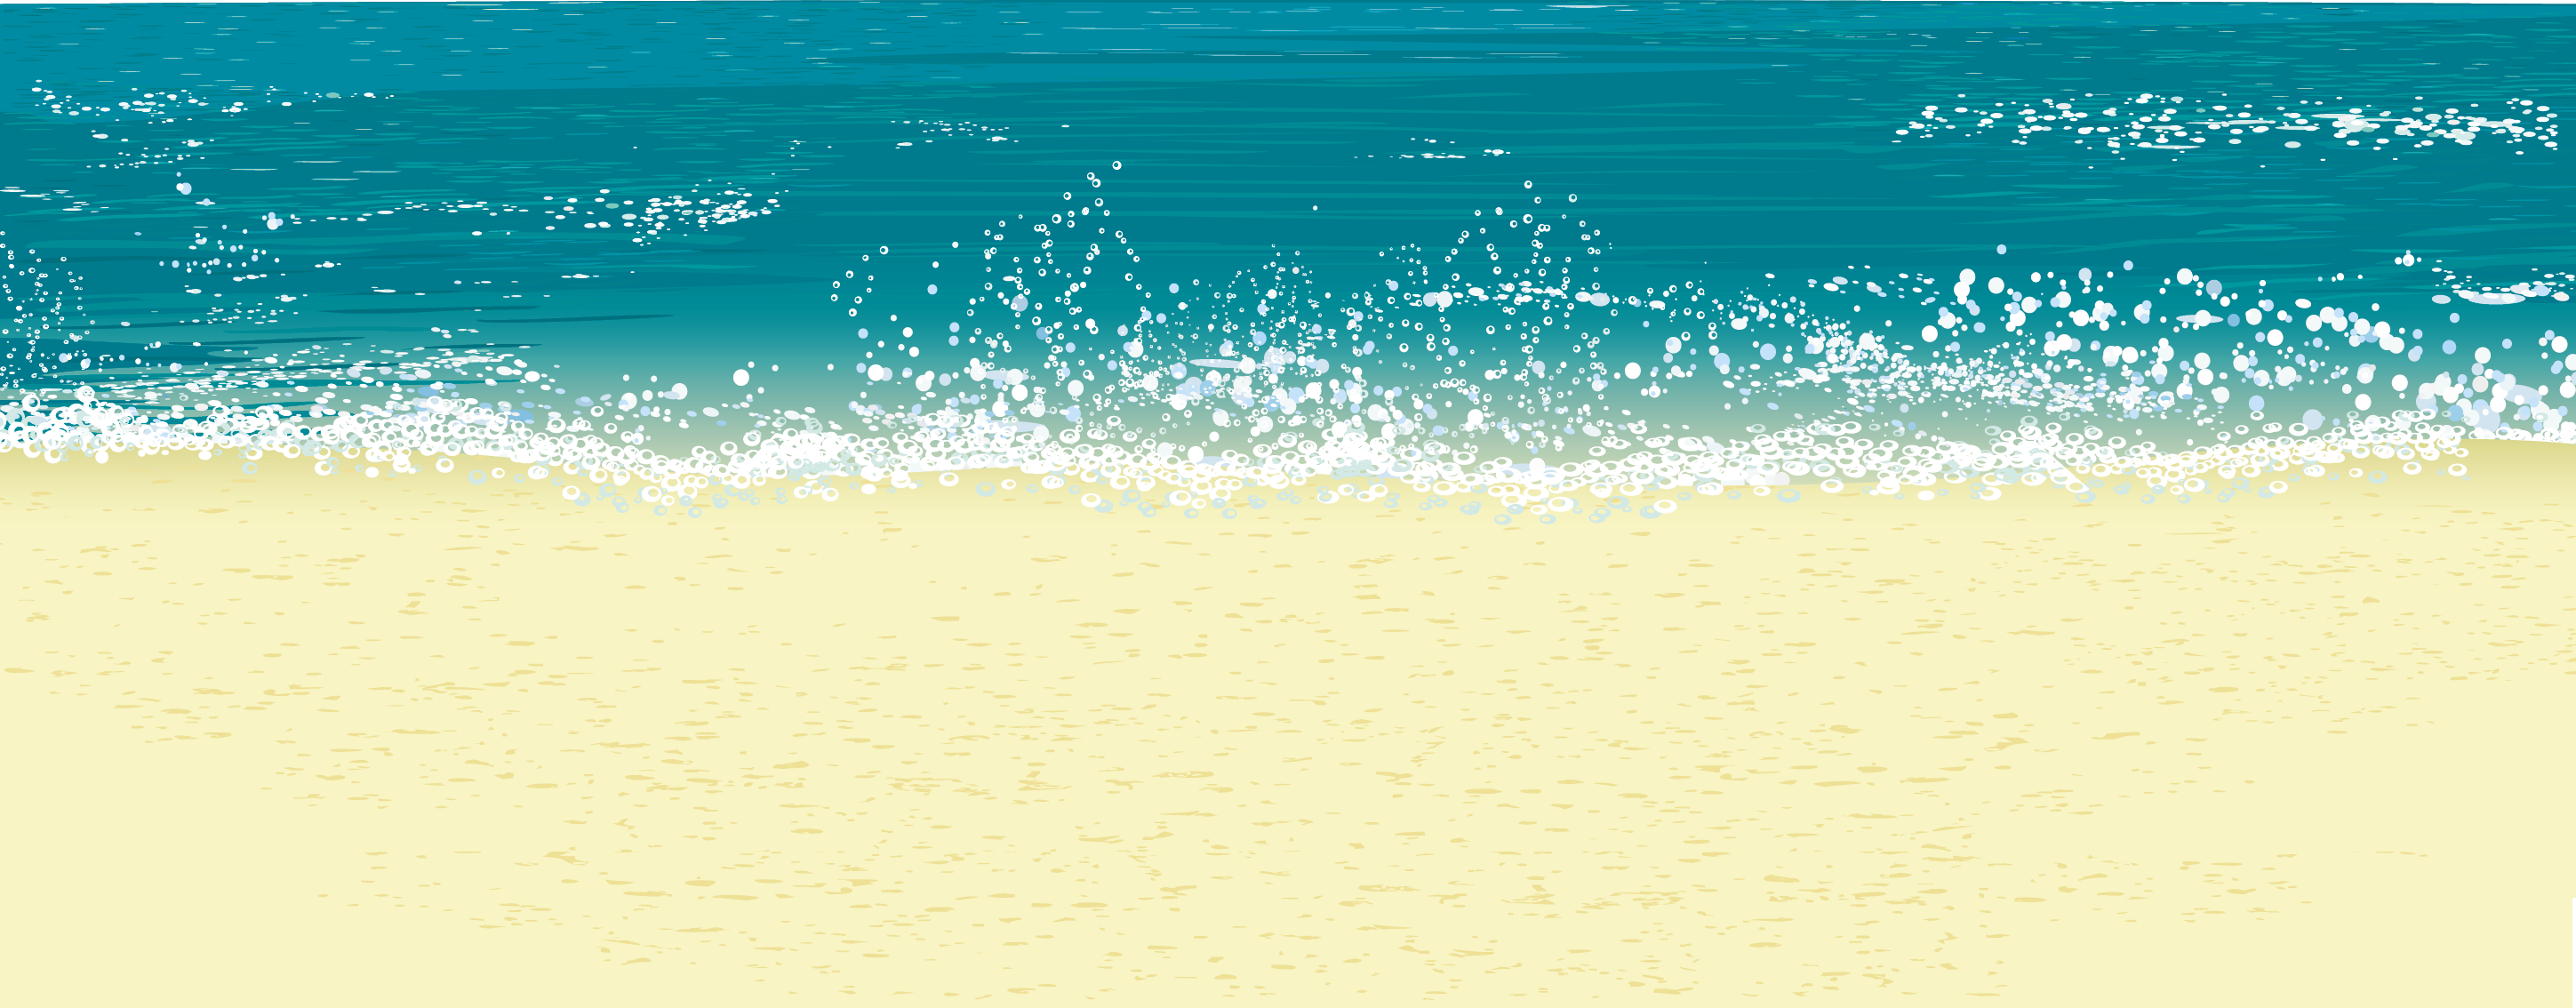 Free beach clipart images clipart image 7